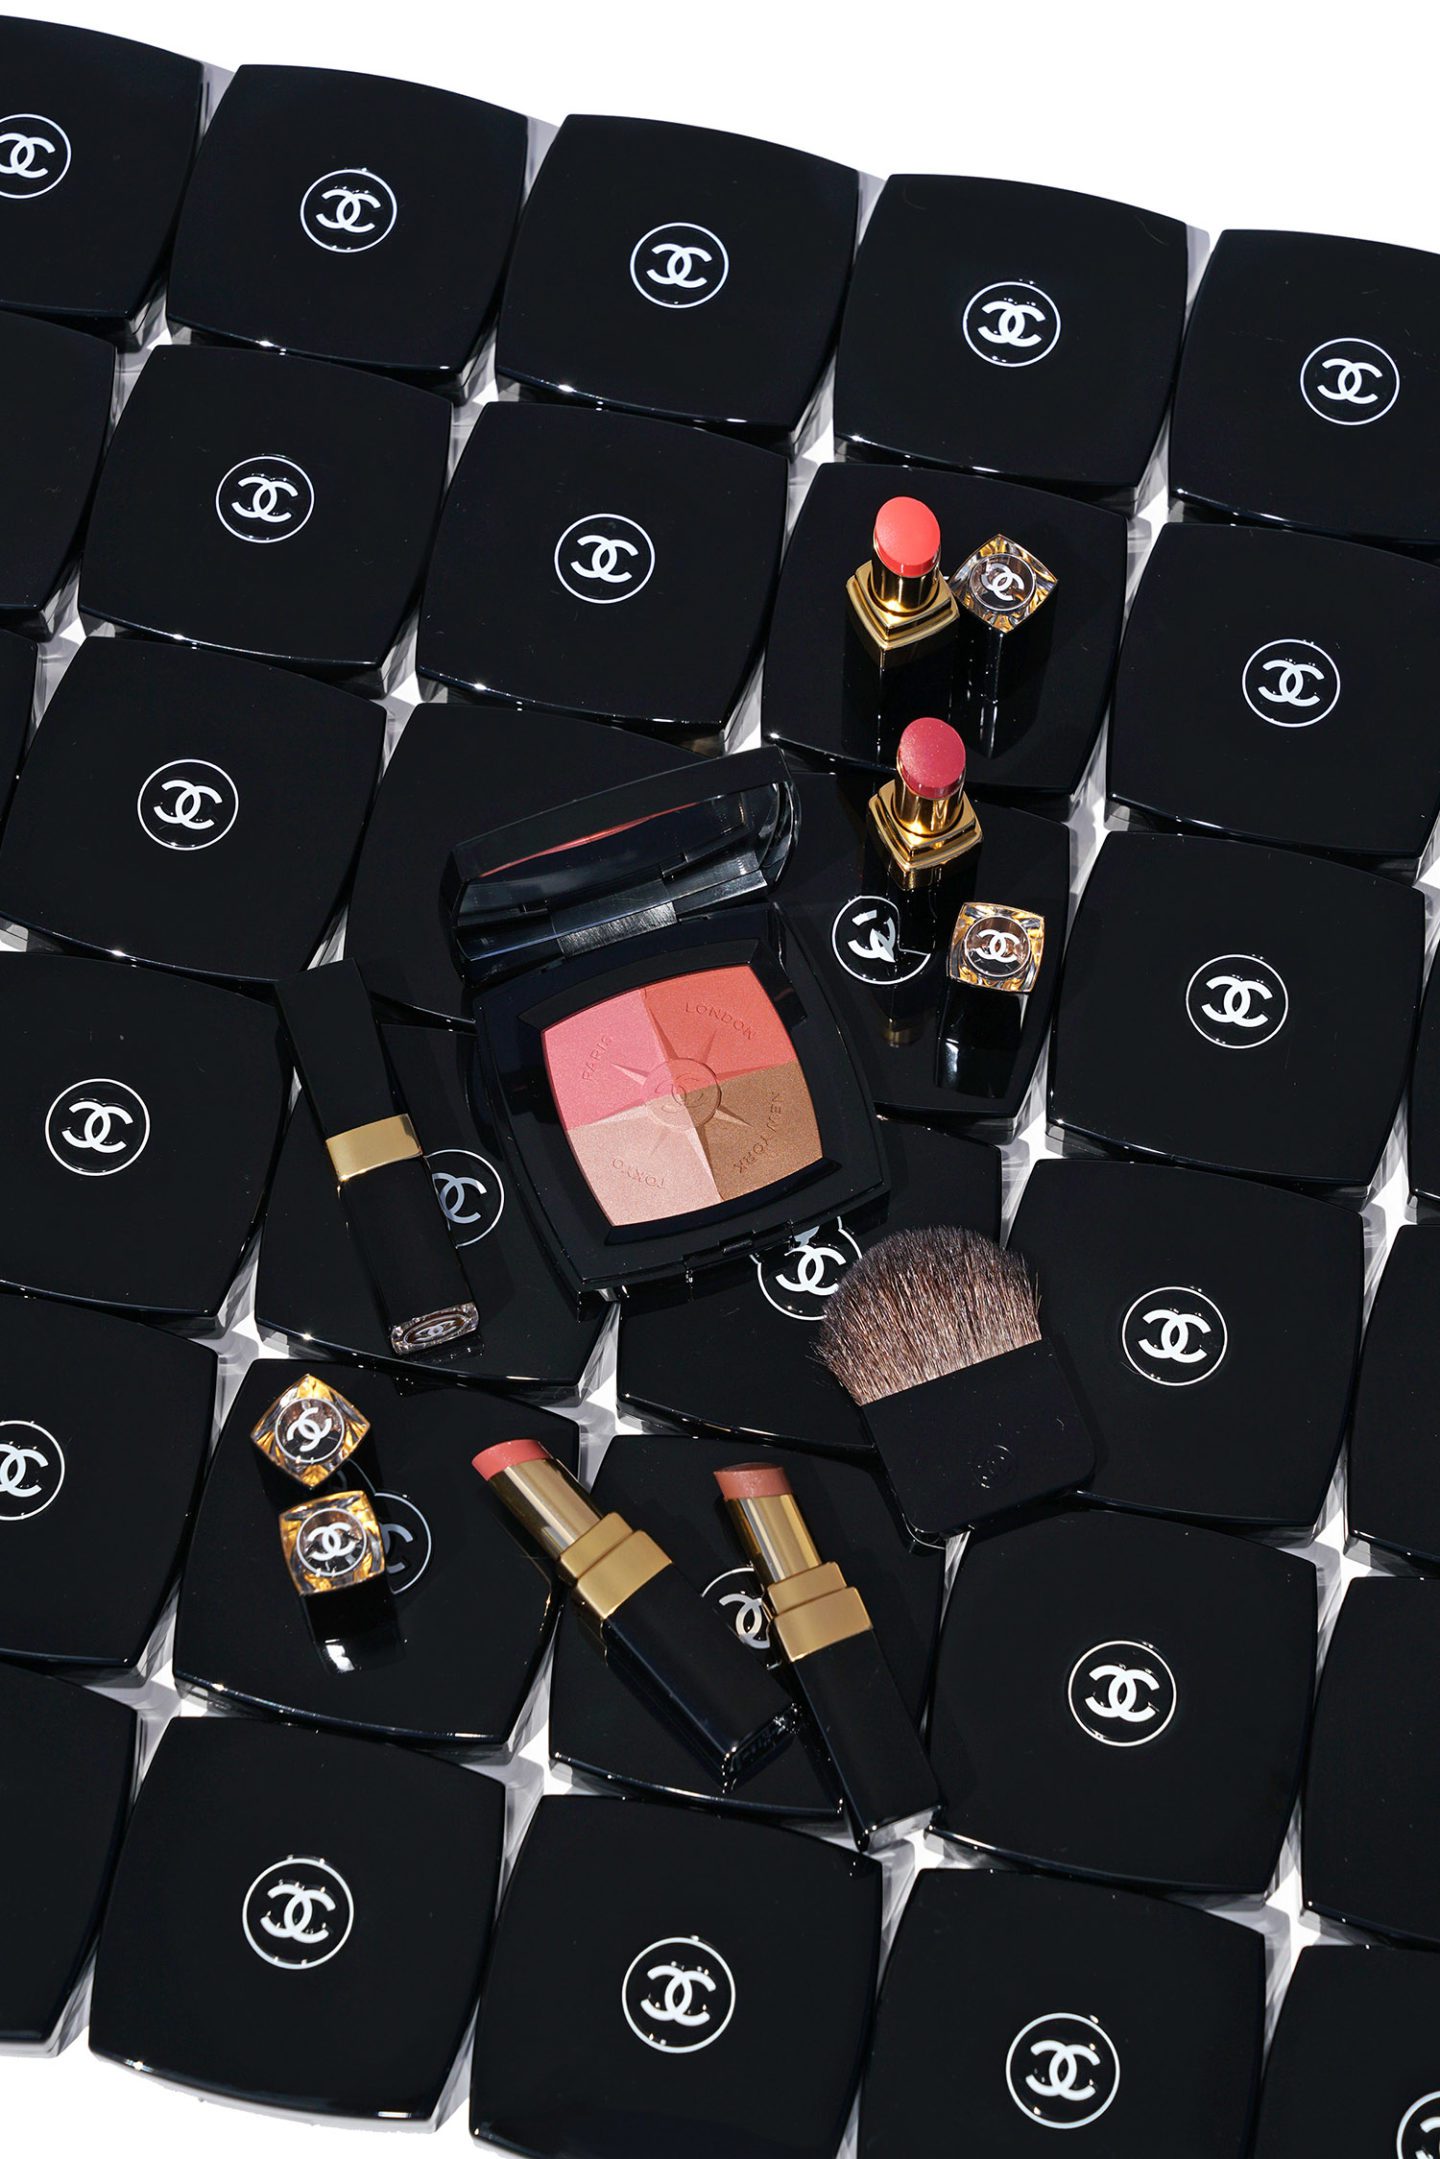 Chanel Rouge Coco Flash and Voyage de Chanel Travel Palette Review 